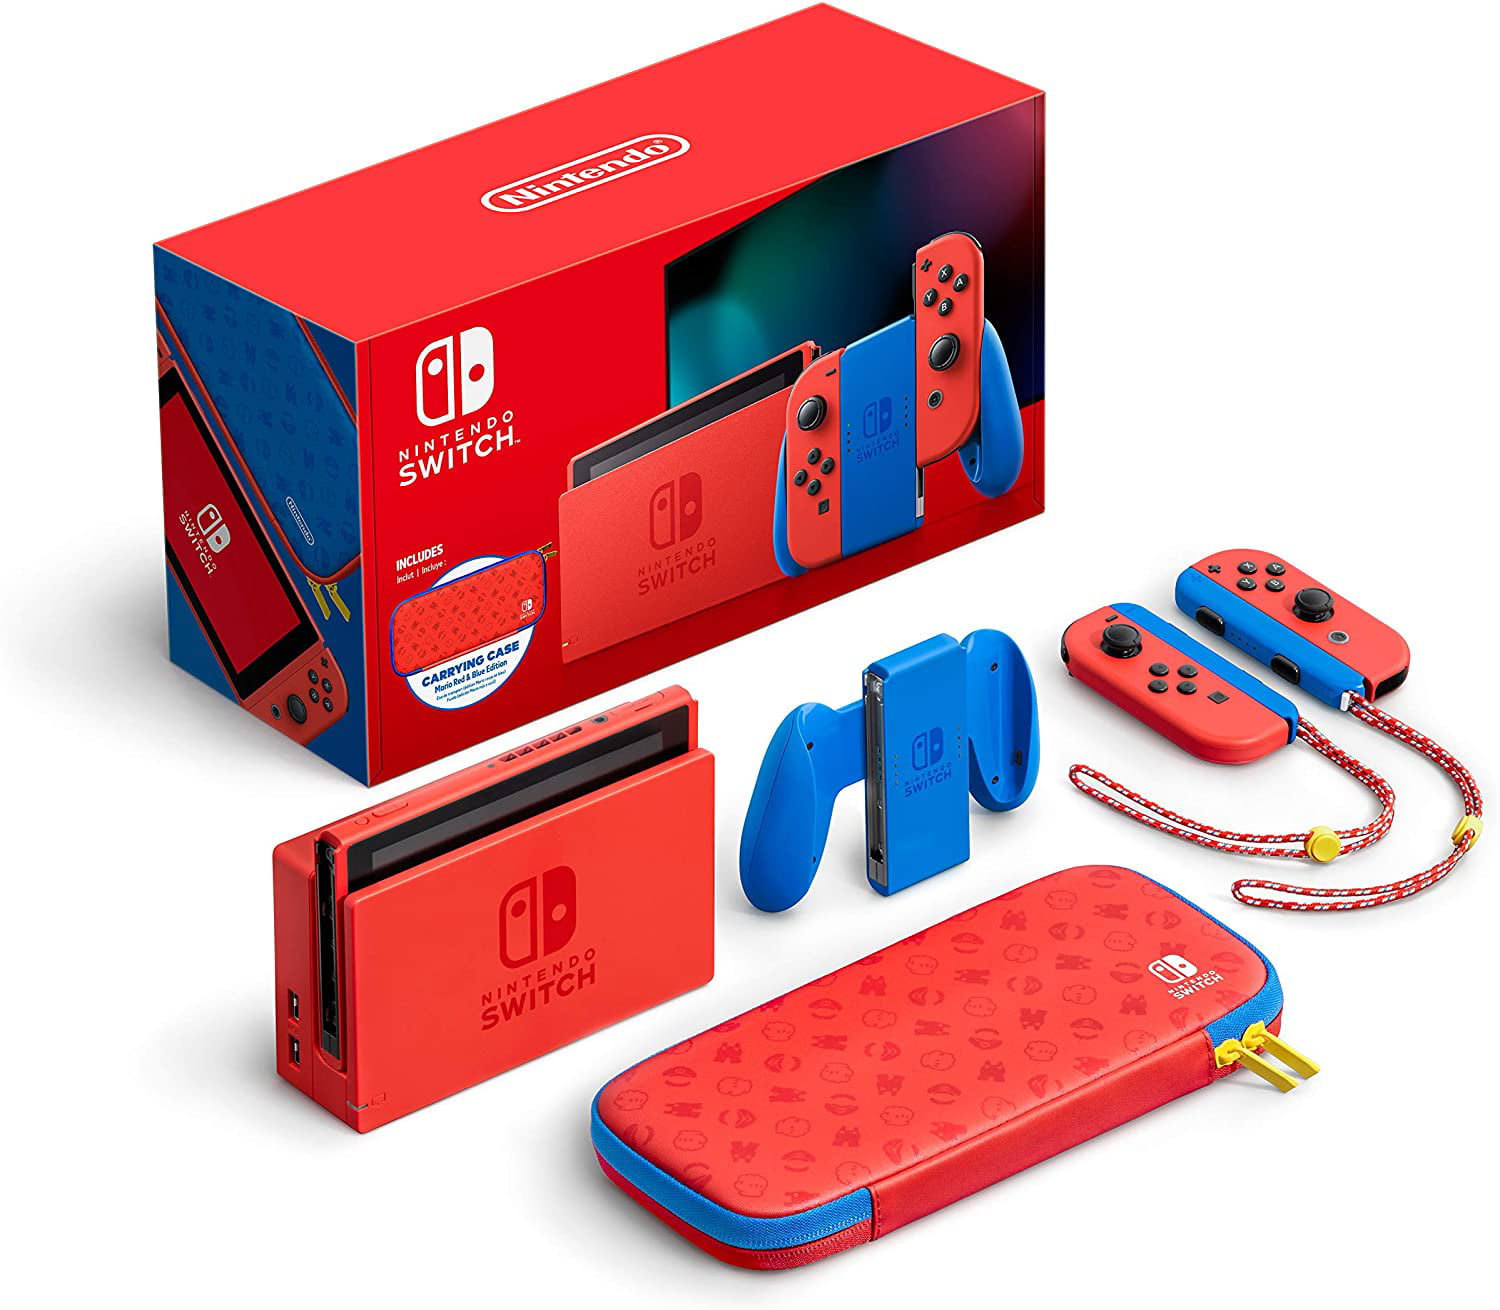 Nintendo Switch with Neon Blue and Neon Red Joy‑Con - HAC-001(-01 